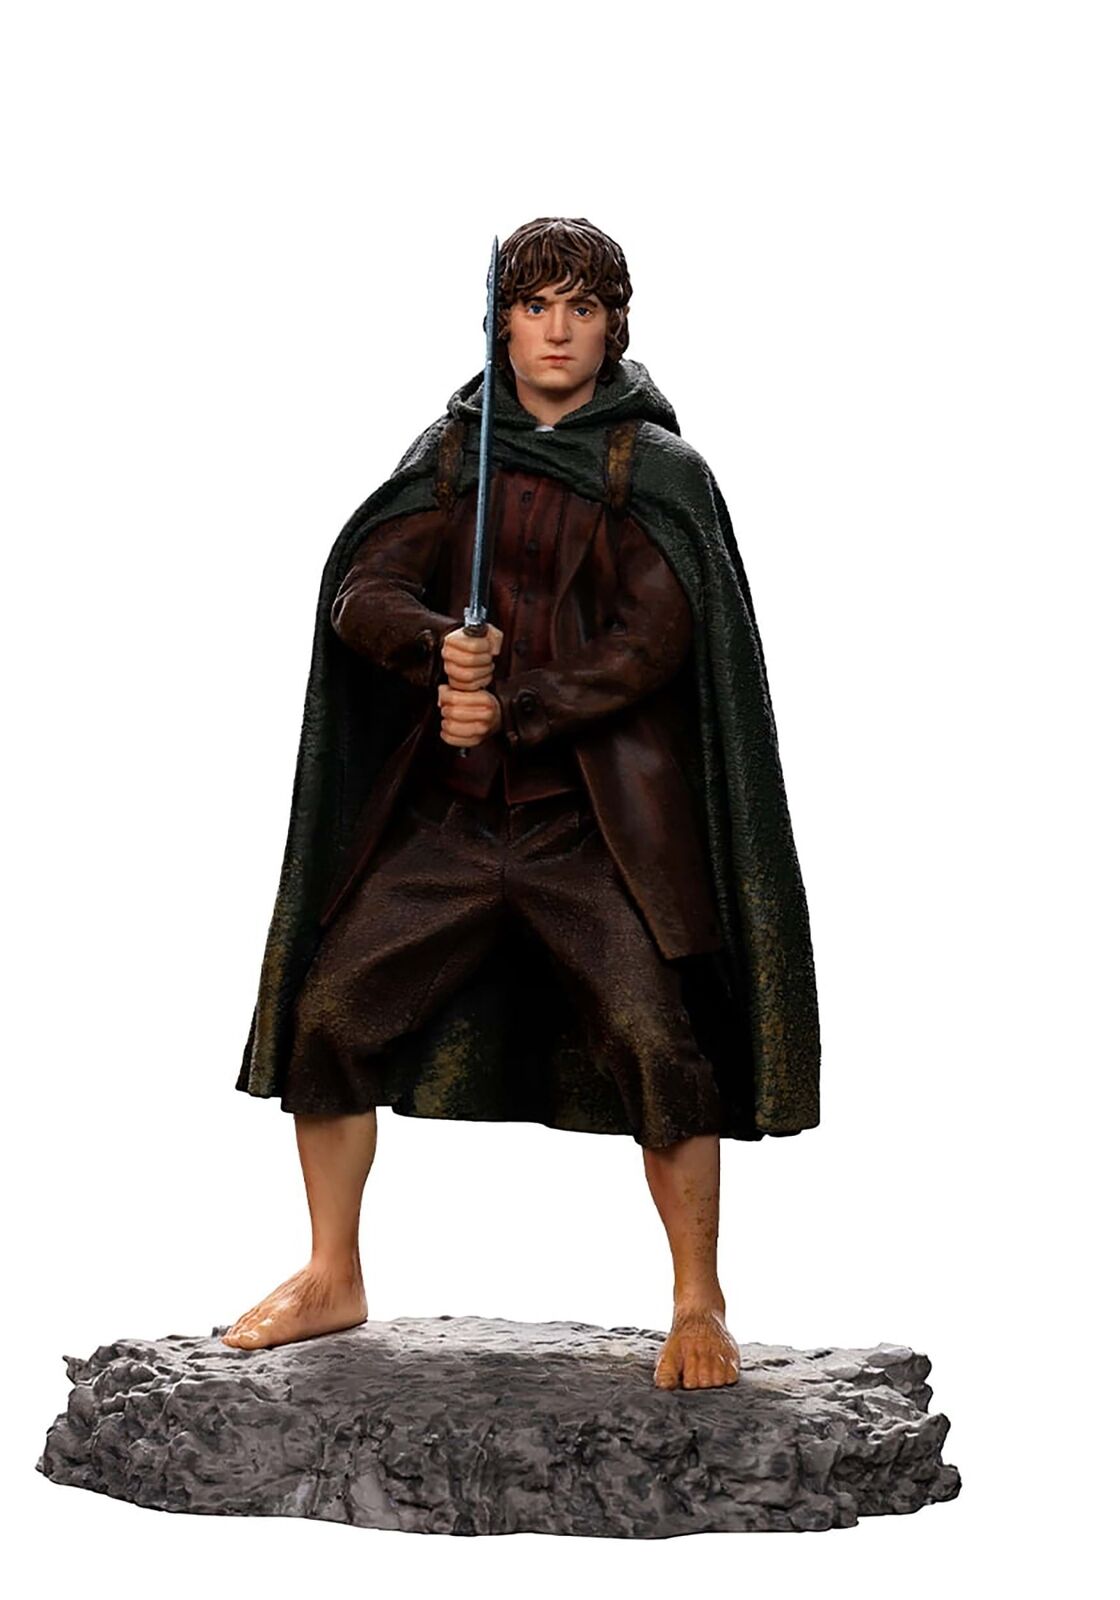 Interesting Lord of the Rings Frodo Baggins BDS Art Scale 1/10 Statue on eBay